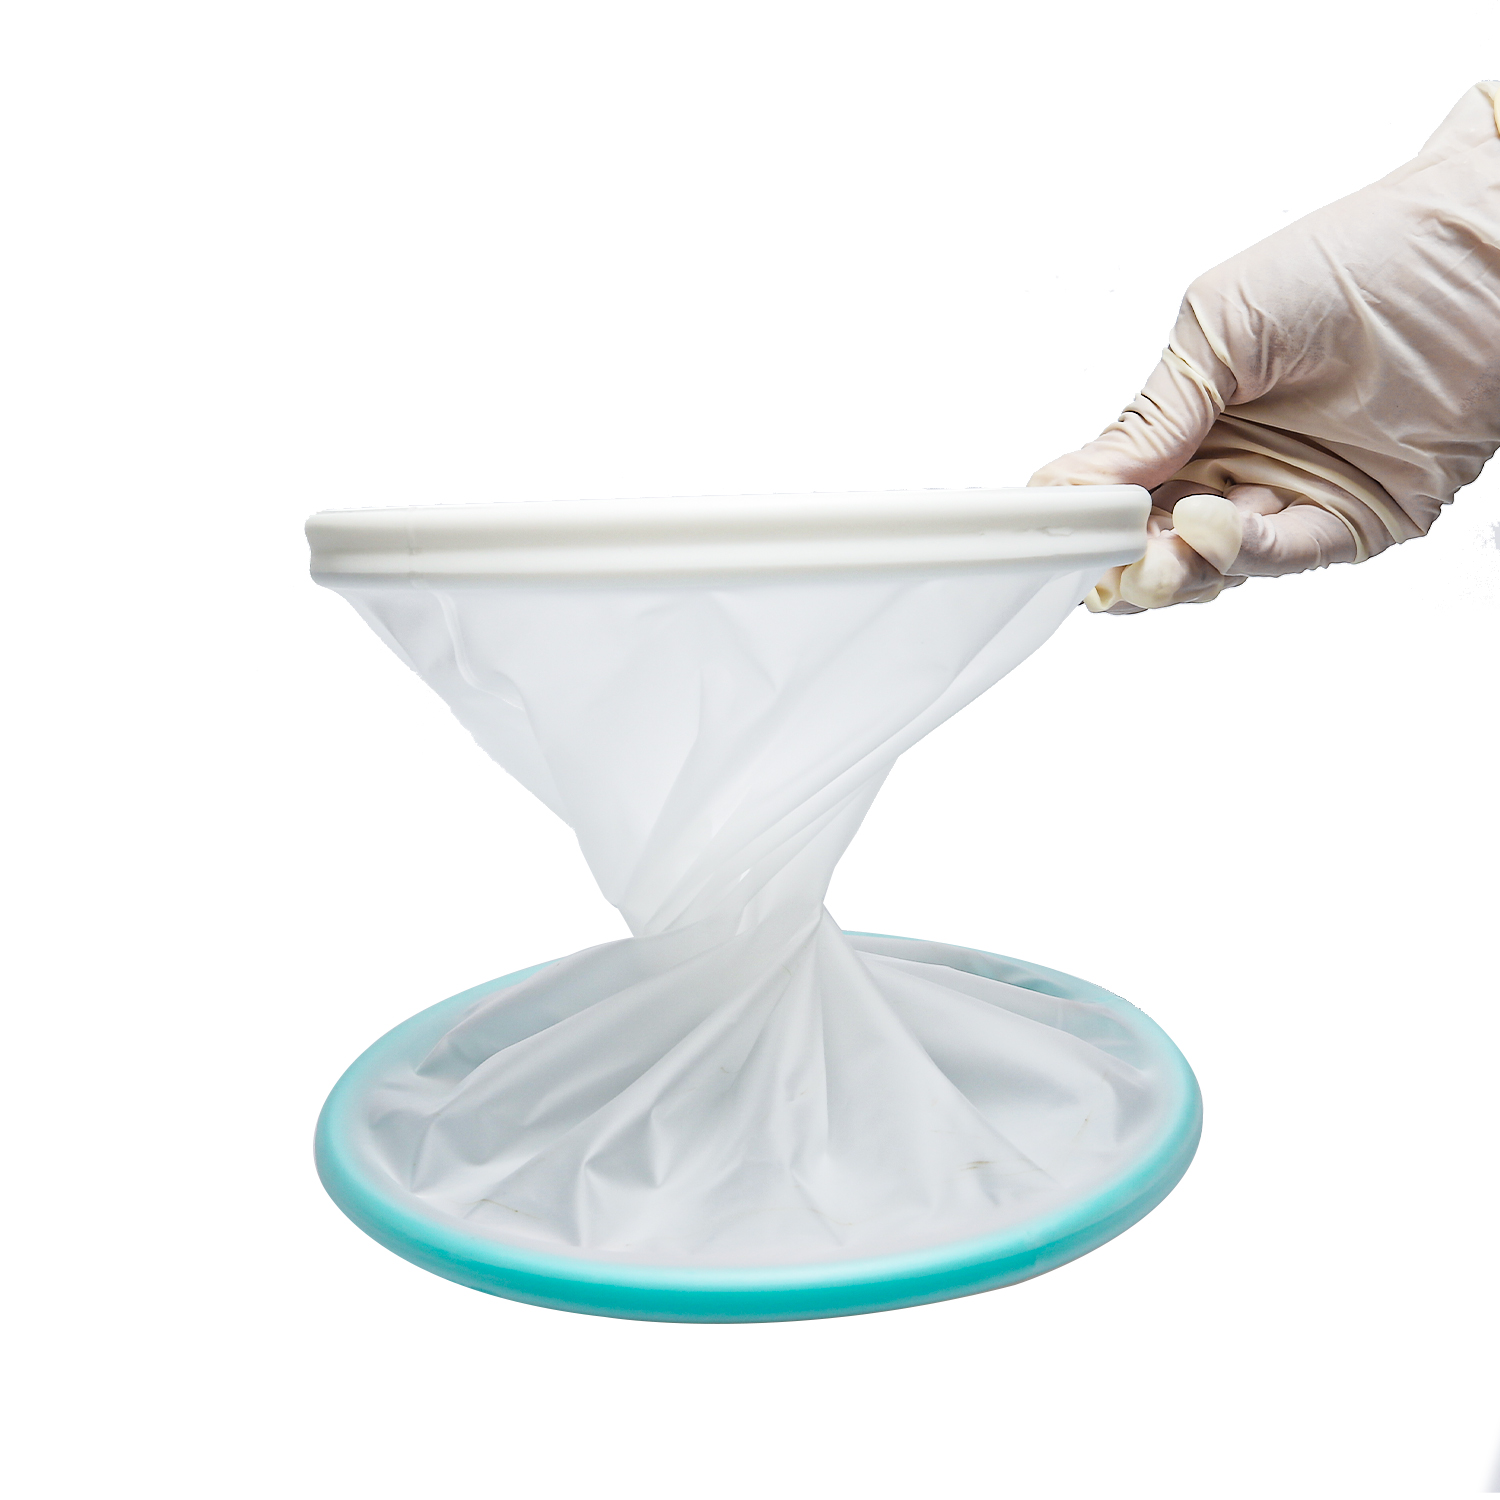 Sterile New Products Non-toxic Incision Sleeve